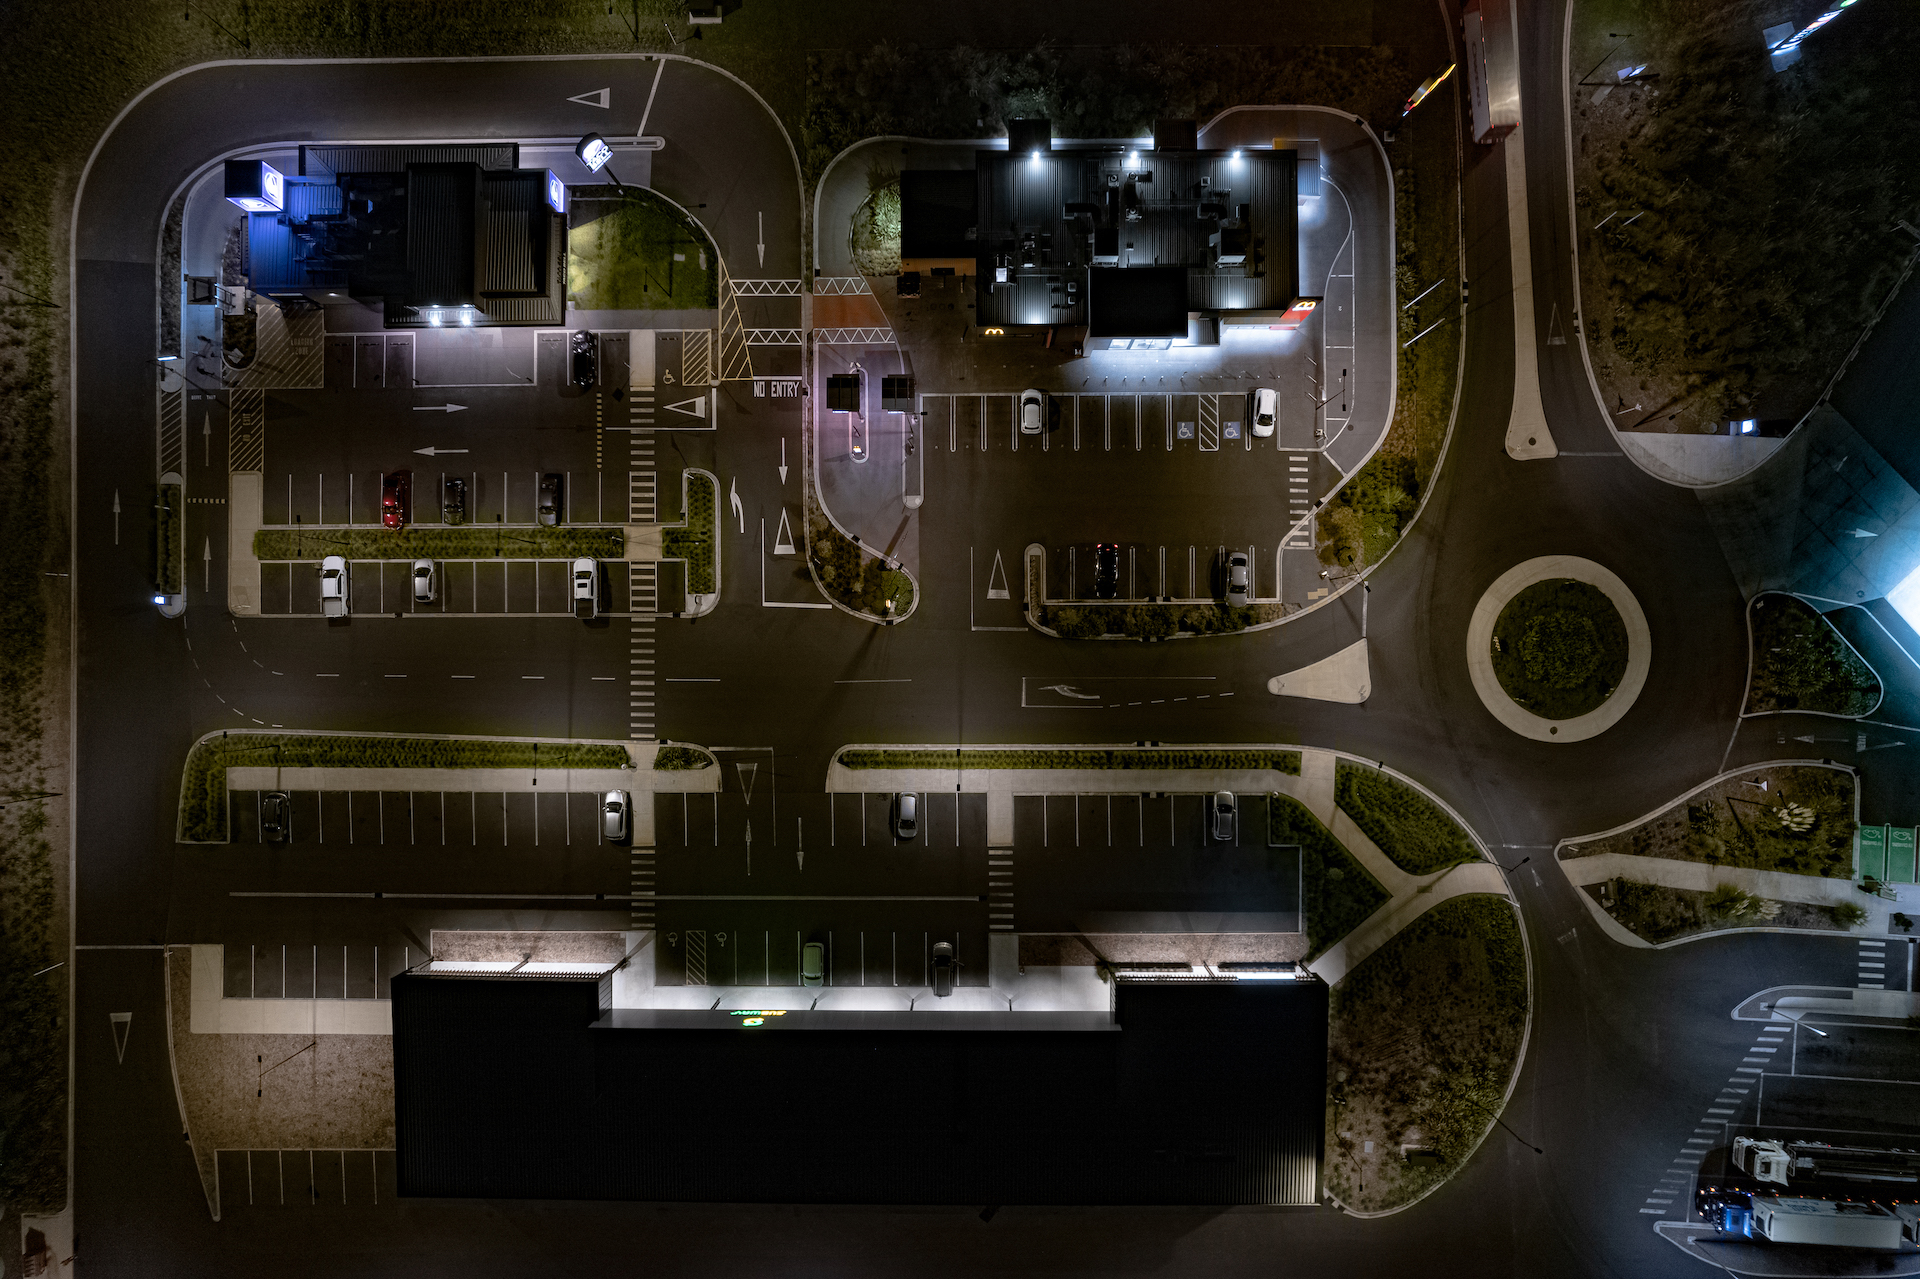 Overview of Taupiri parking at night illuminated by ibex lighting solutions.